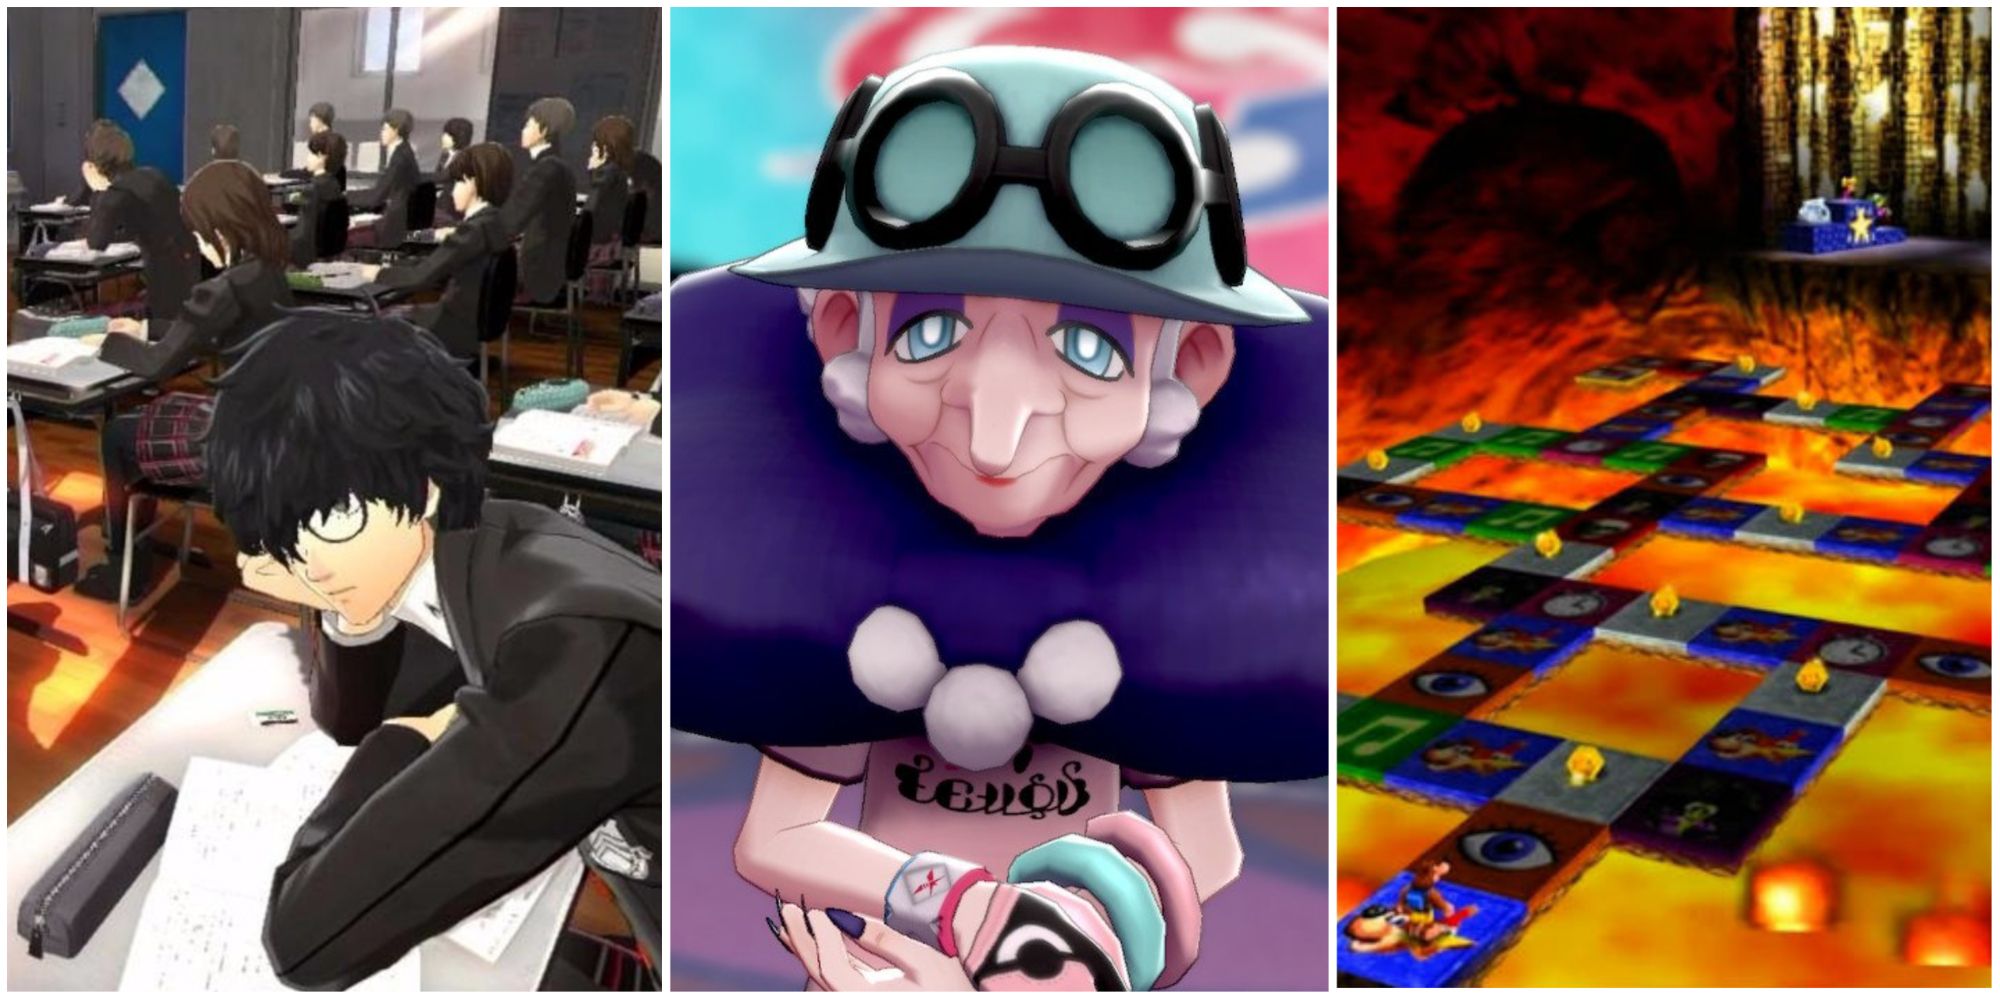 Joker from Persona 5, Opal from Pokemon, and the quiz board from Banjo Kazooie